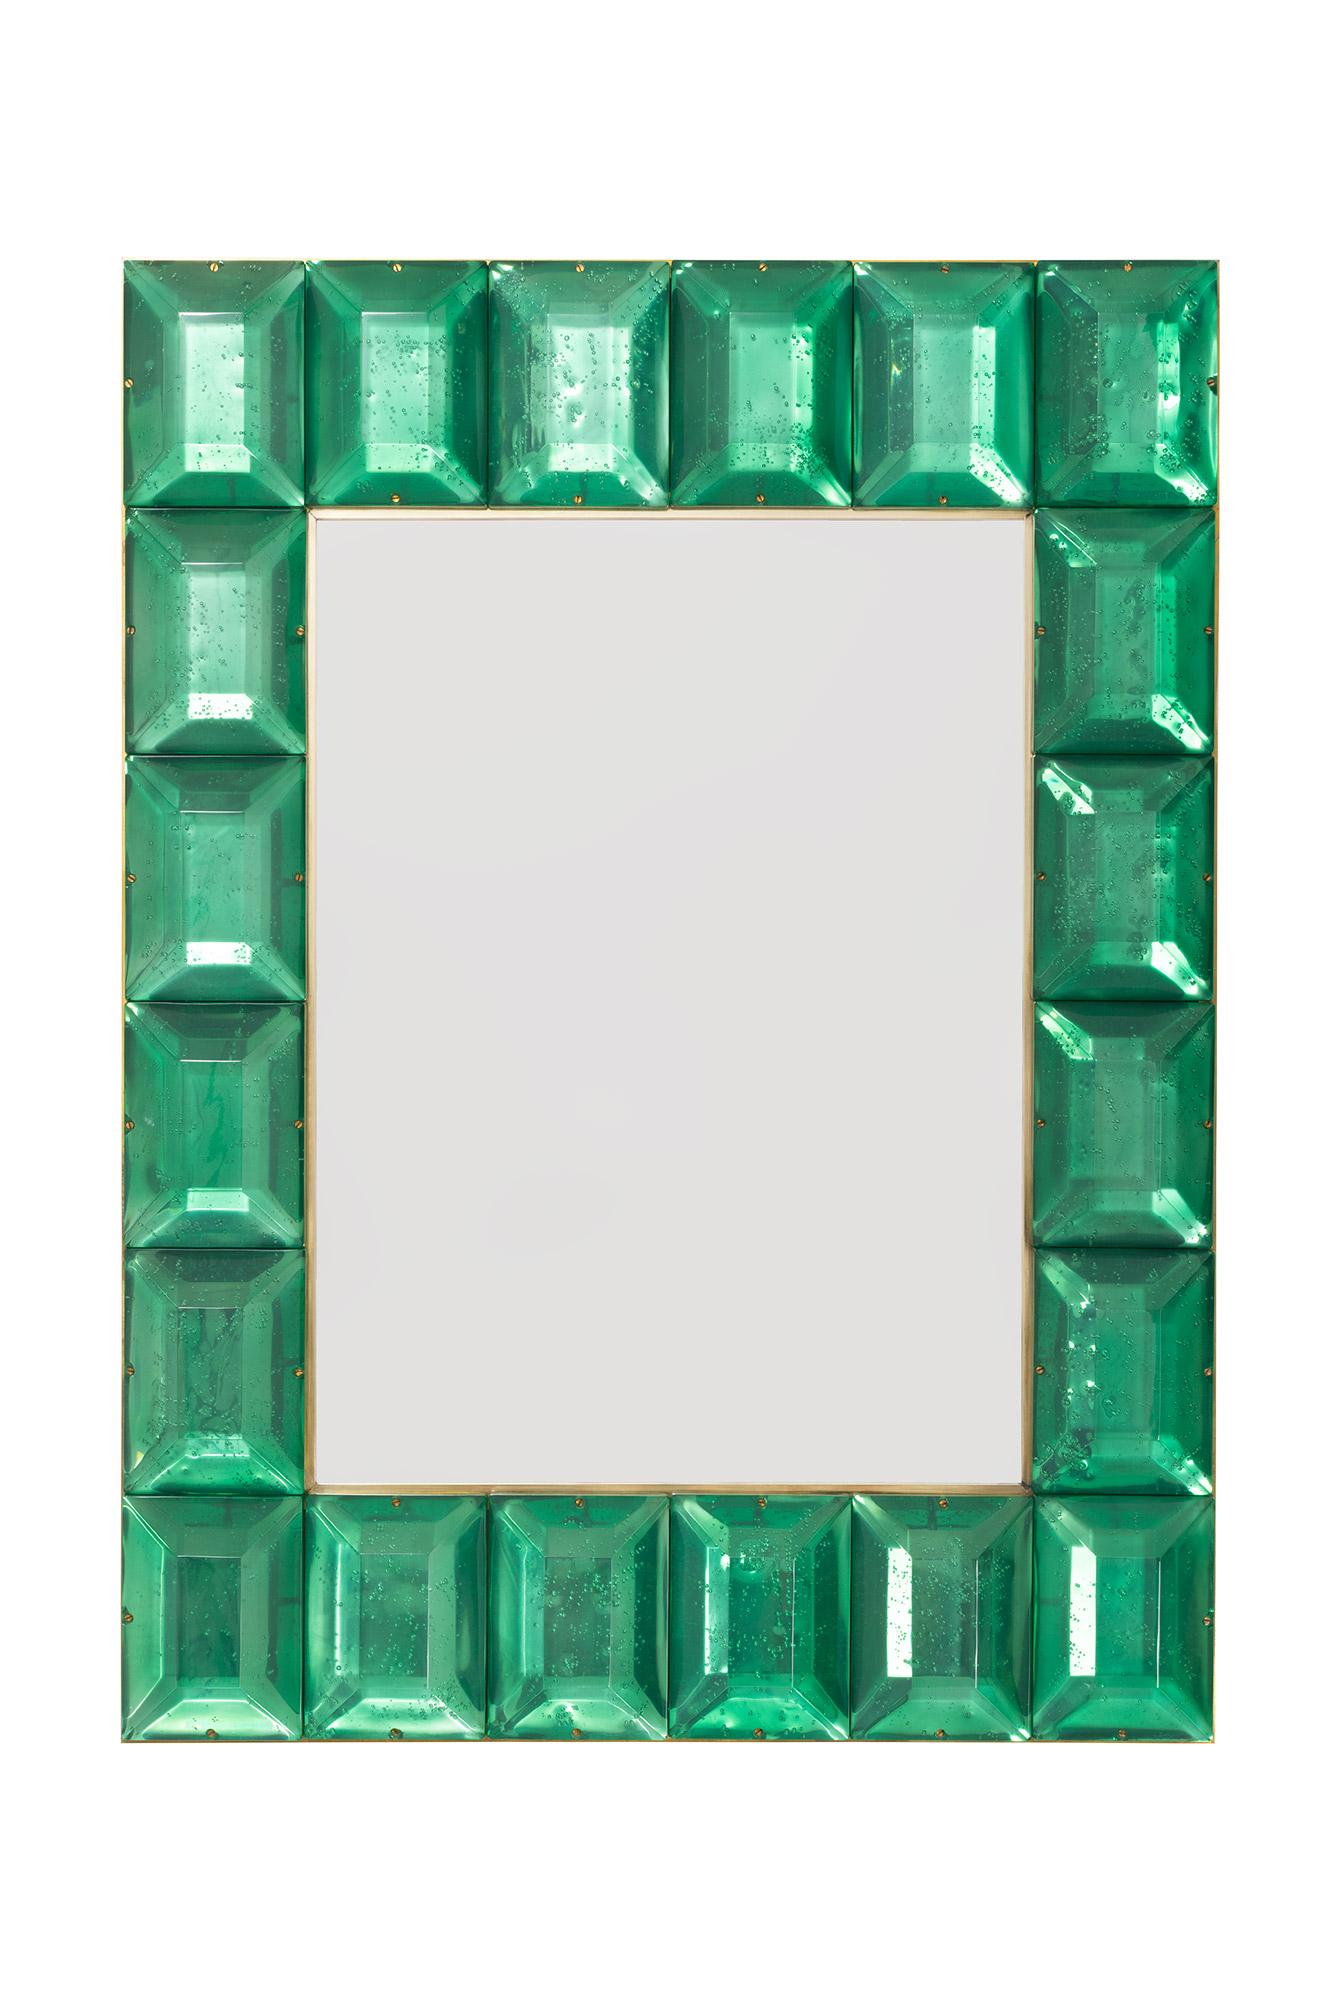 Pair of emerald green diamond Murano glass mirror.
Customizable faceted Murano glass mirror in emerald green
Contemporary and customizable mirror with a faceted Murano glass frame, edged in brass and handcrafted by a team of artisans in Venice,